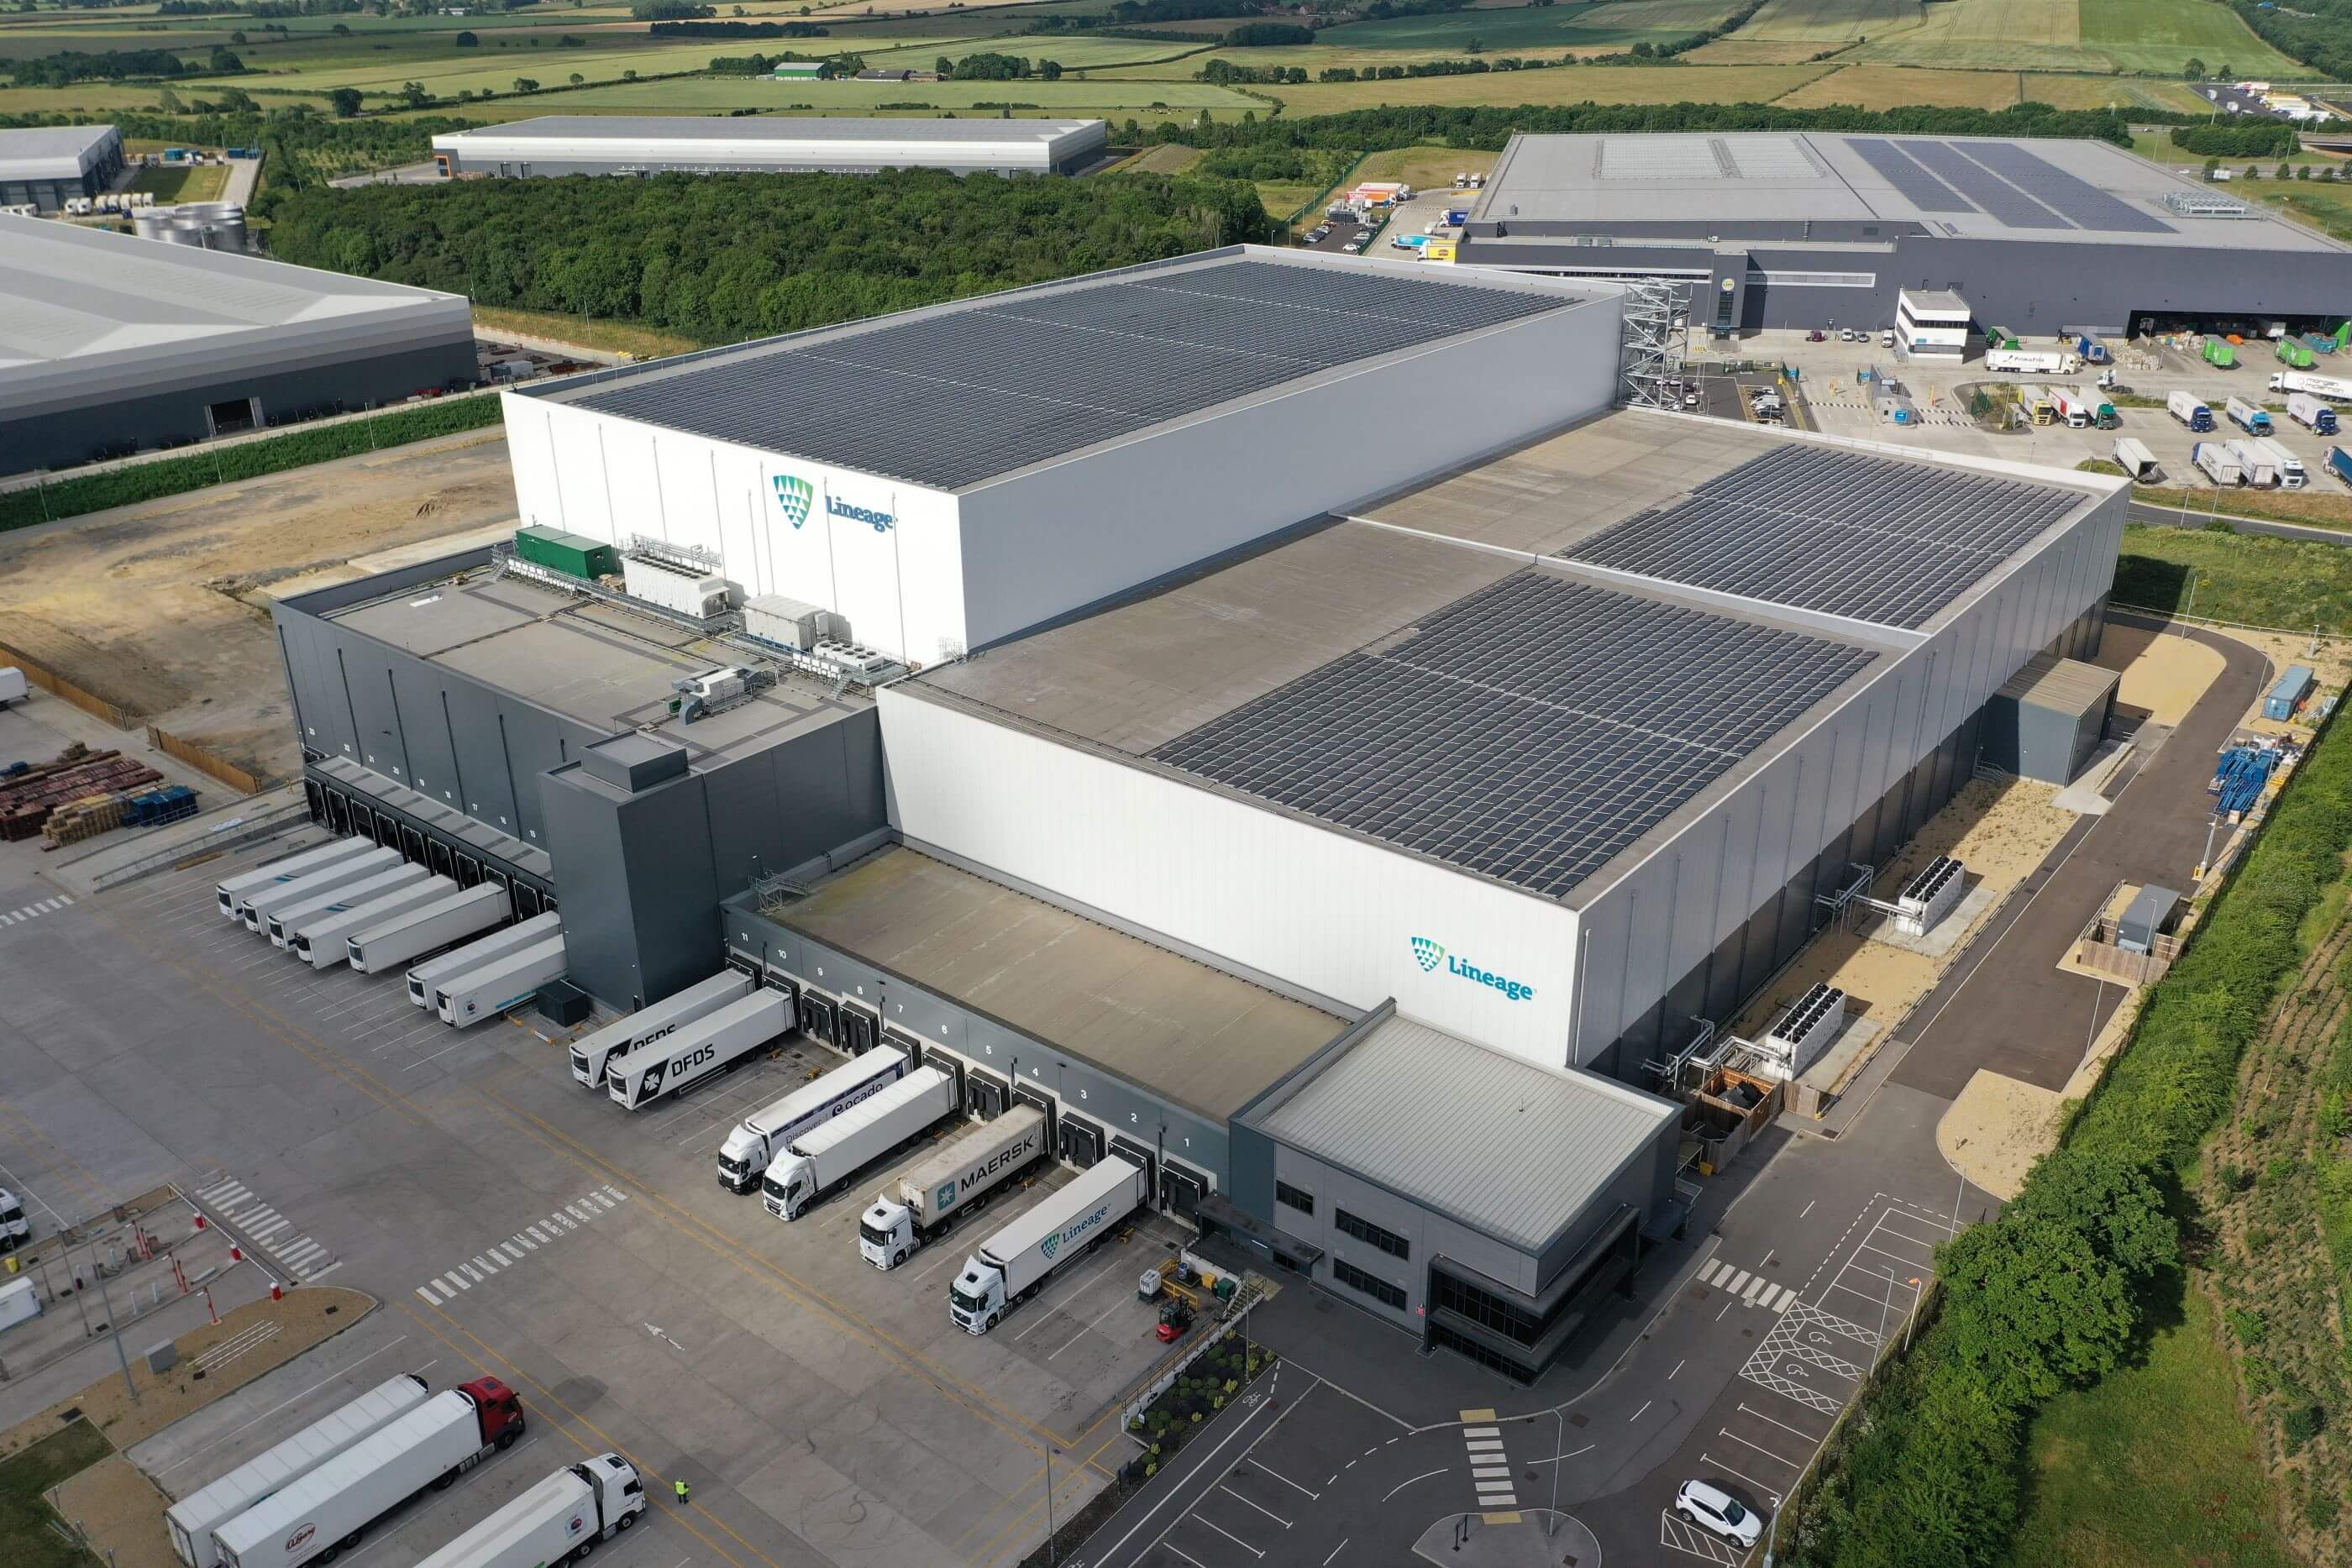 Exterior drone shot of Lineage's Peterborough cold storage warehouse in the UK, showcasing the large facility and rooftop solar panel array.